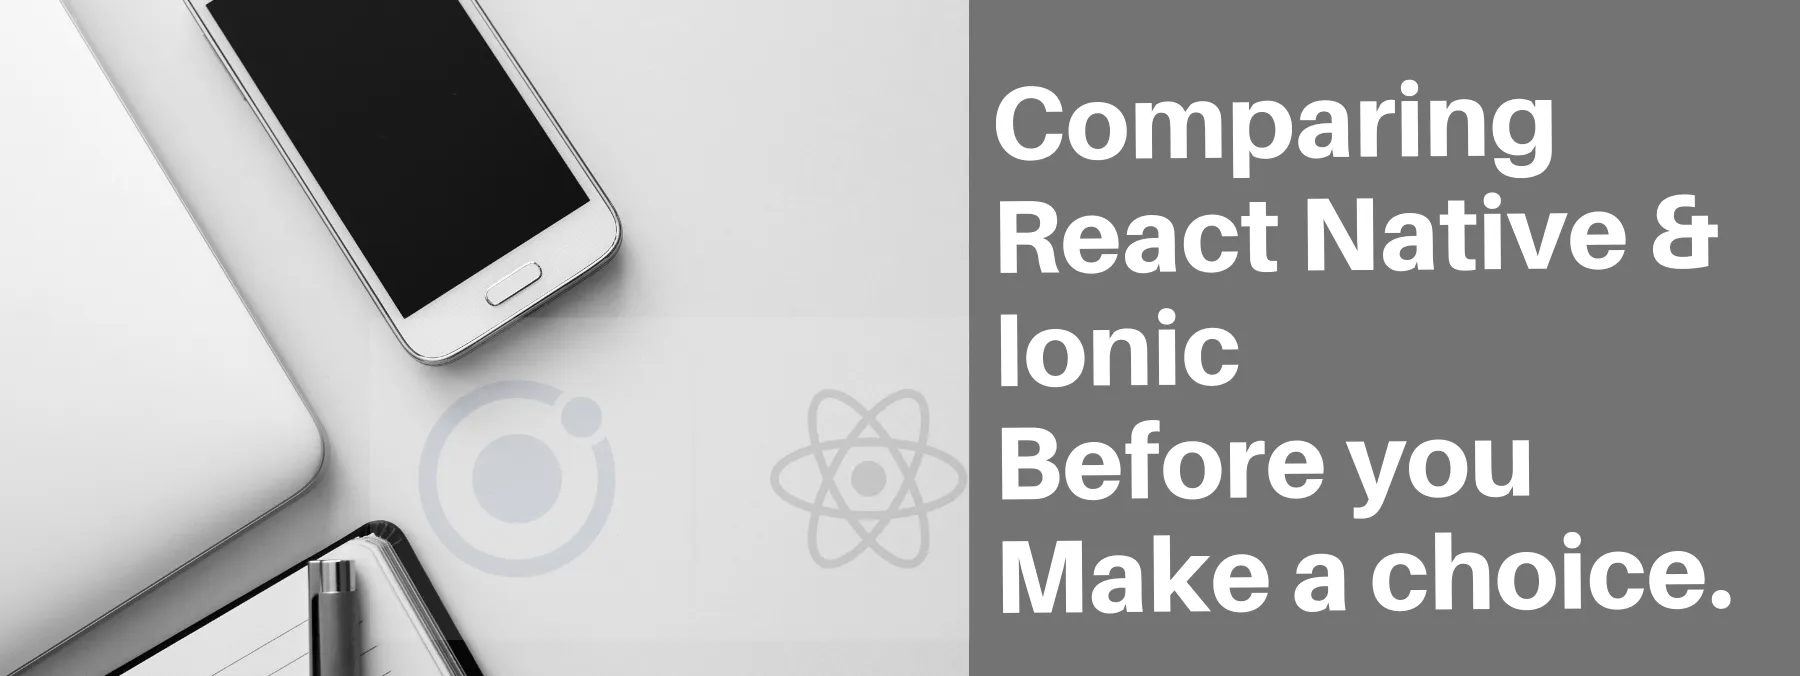 Hire the best React Native App Development Company after comparing React Native and Ionic